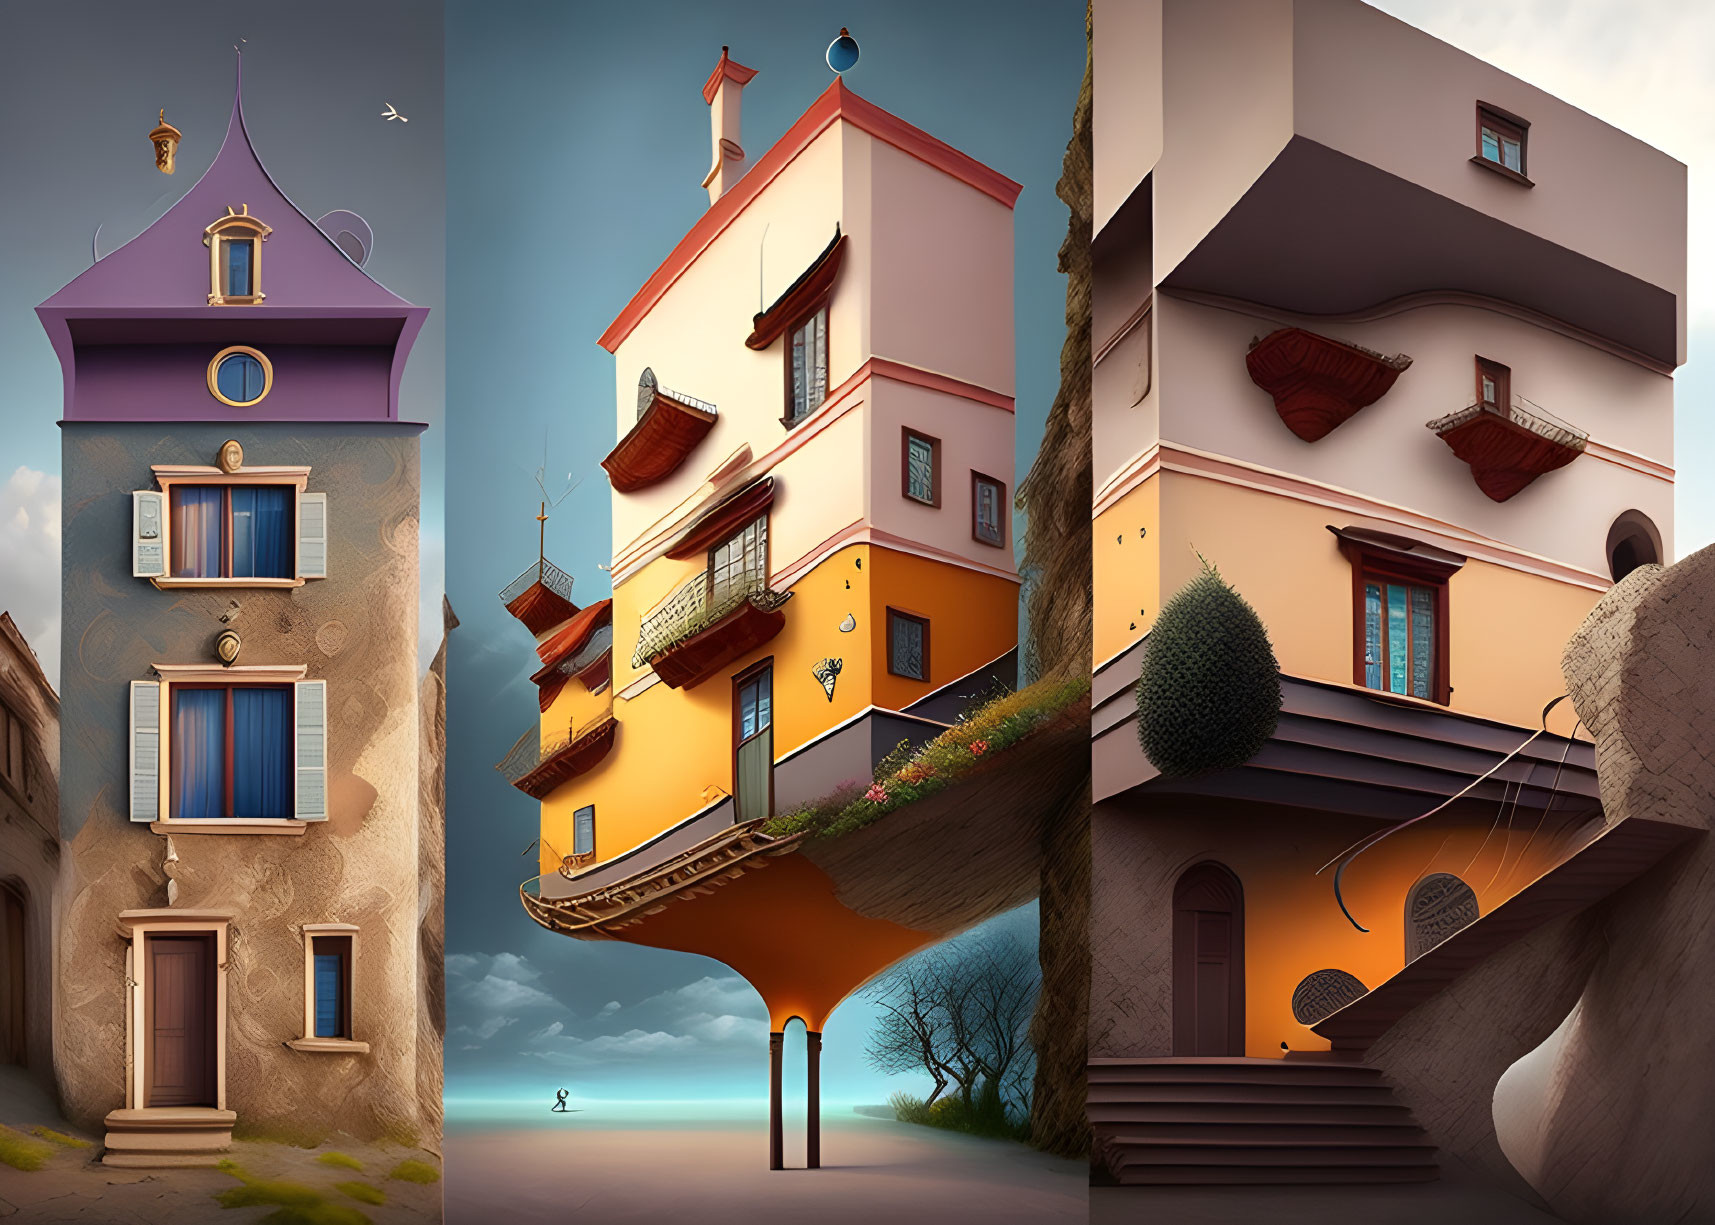 Colorful Whimsical Houses Triptych with Surreal Architecture